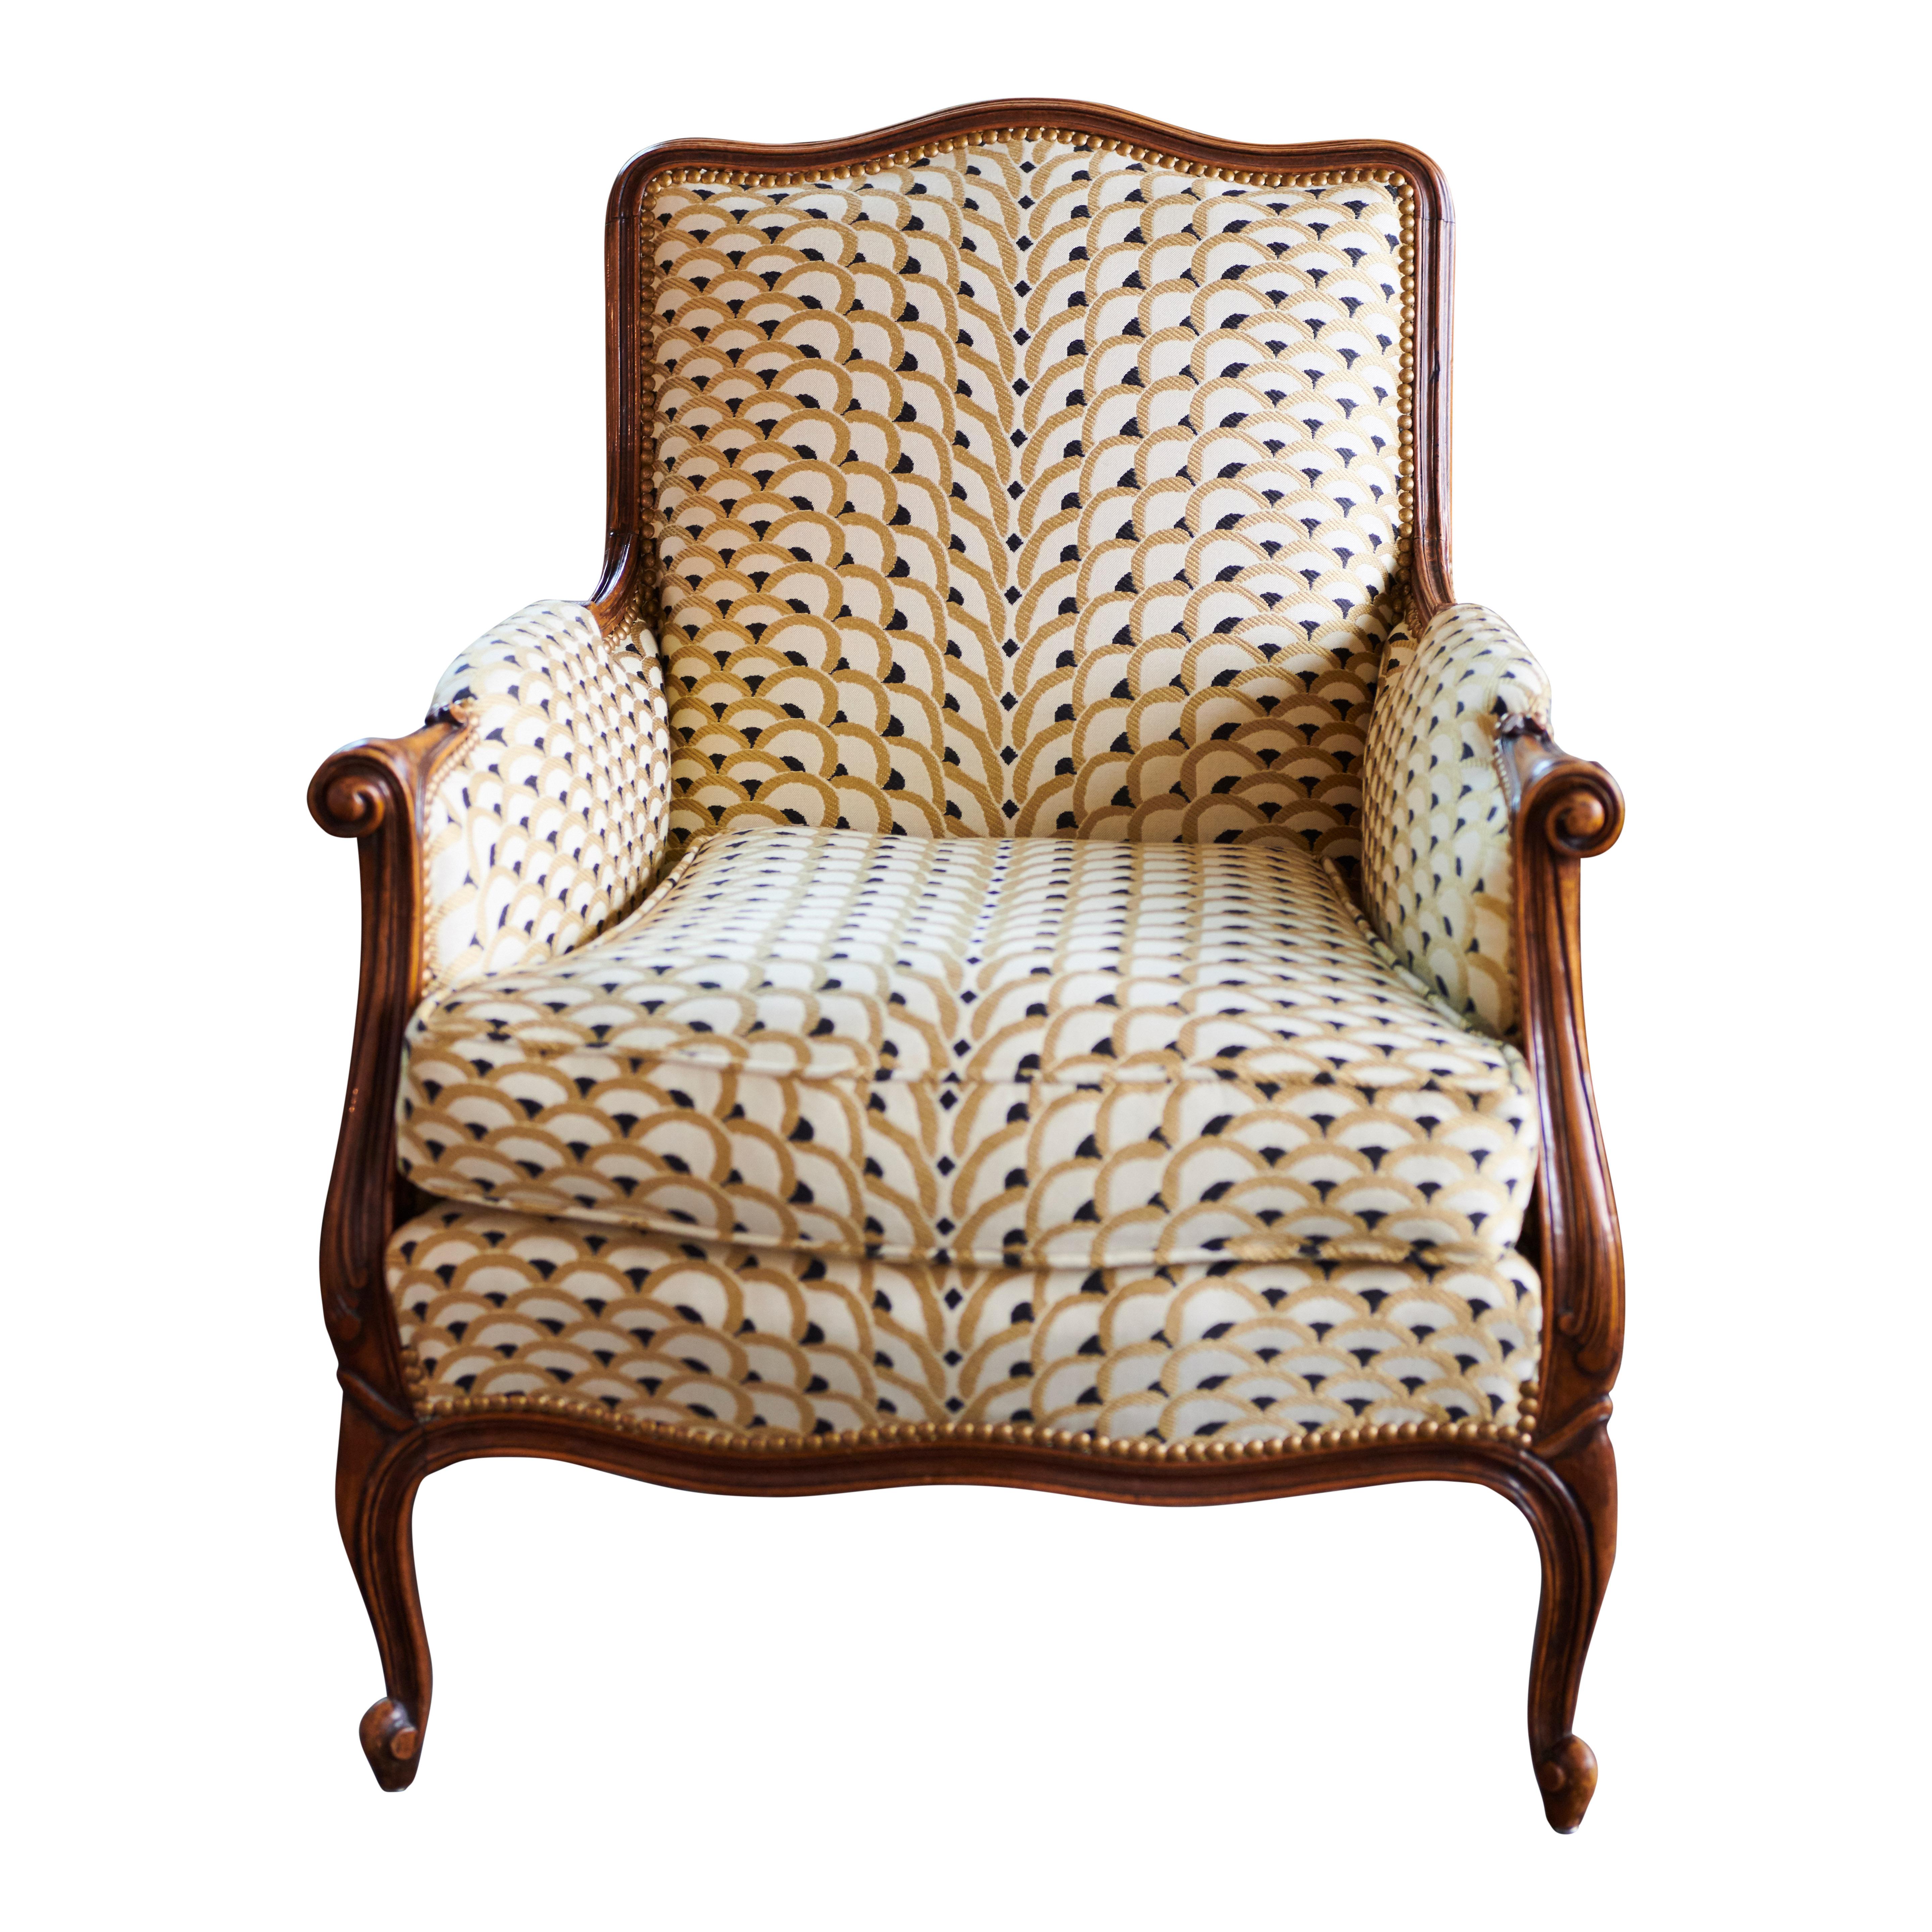 This is a so called Louis XV Bergère style chair. The chair is made from beech wood and has cabriole legs. The front has been upholstered with a new fabric Georges Le Manach Les Écailles from Pierre Frey. The back of the chair has been covered with